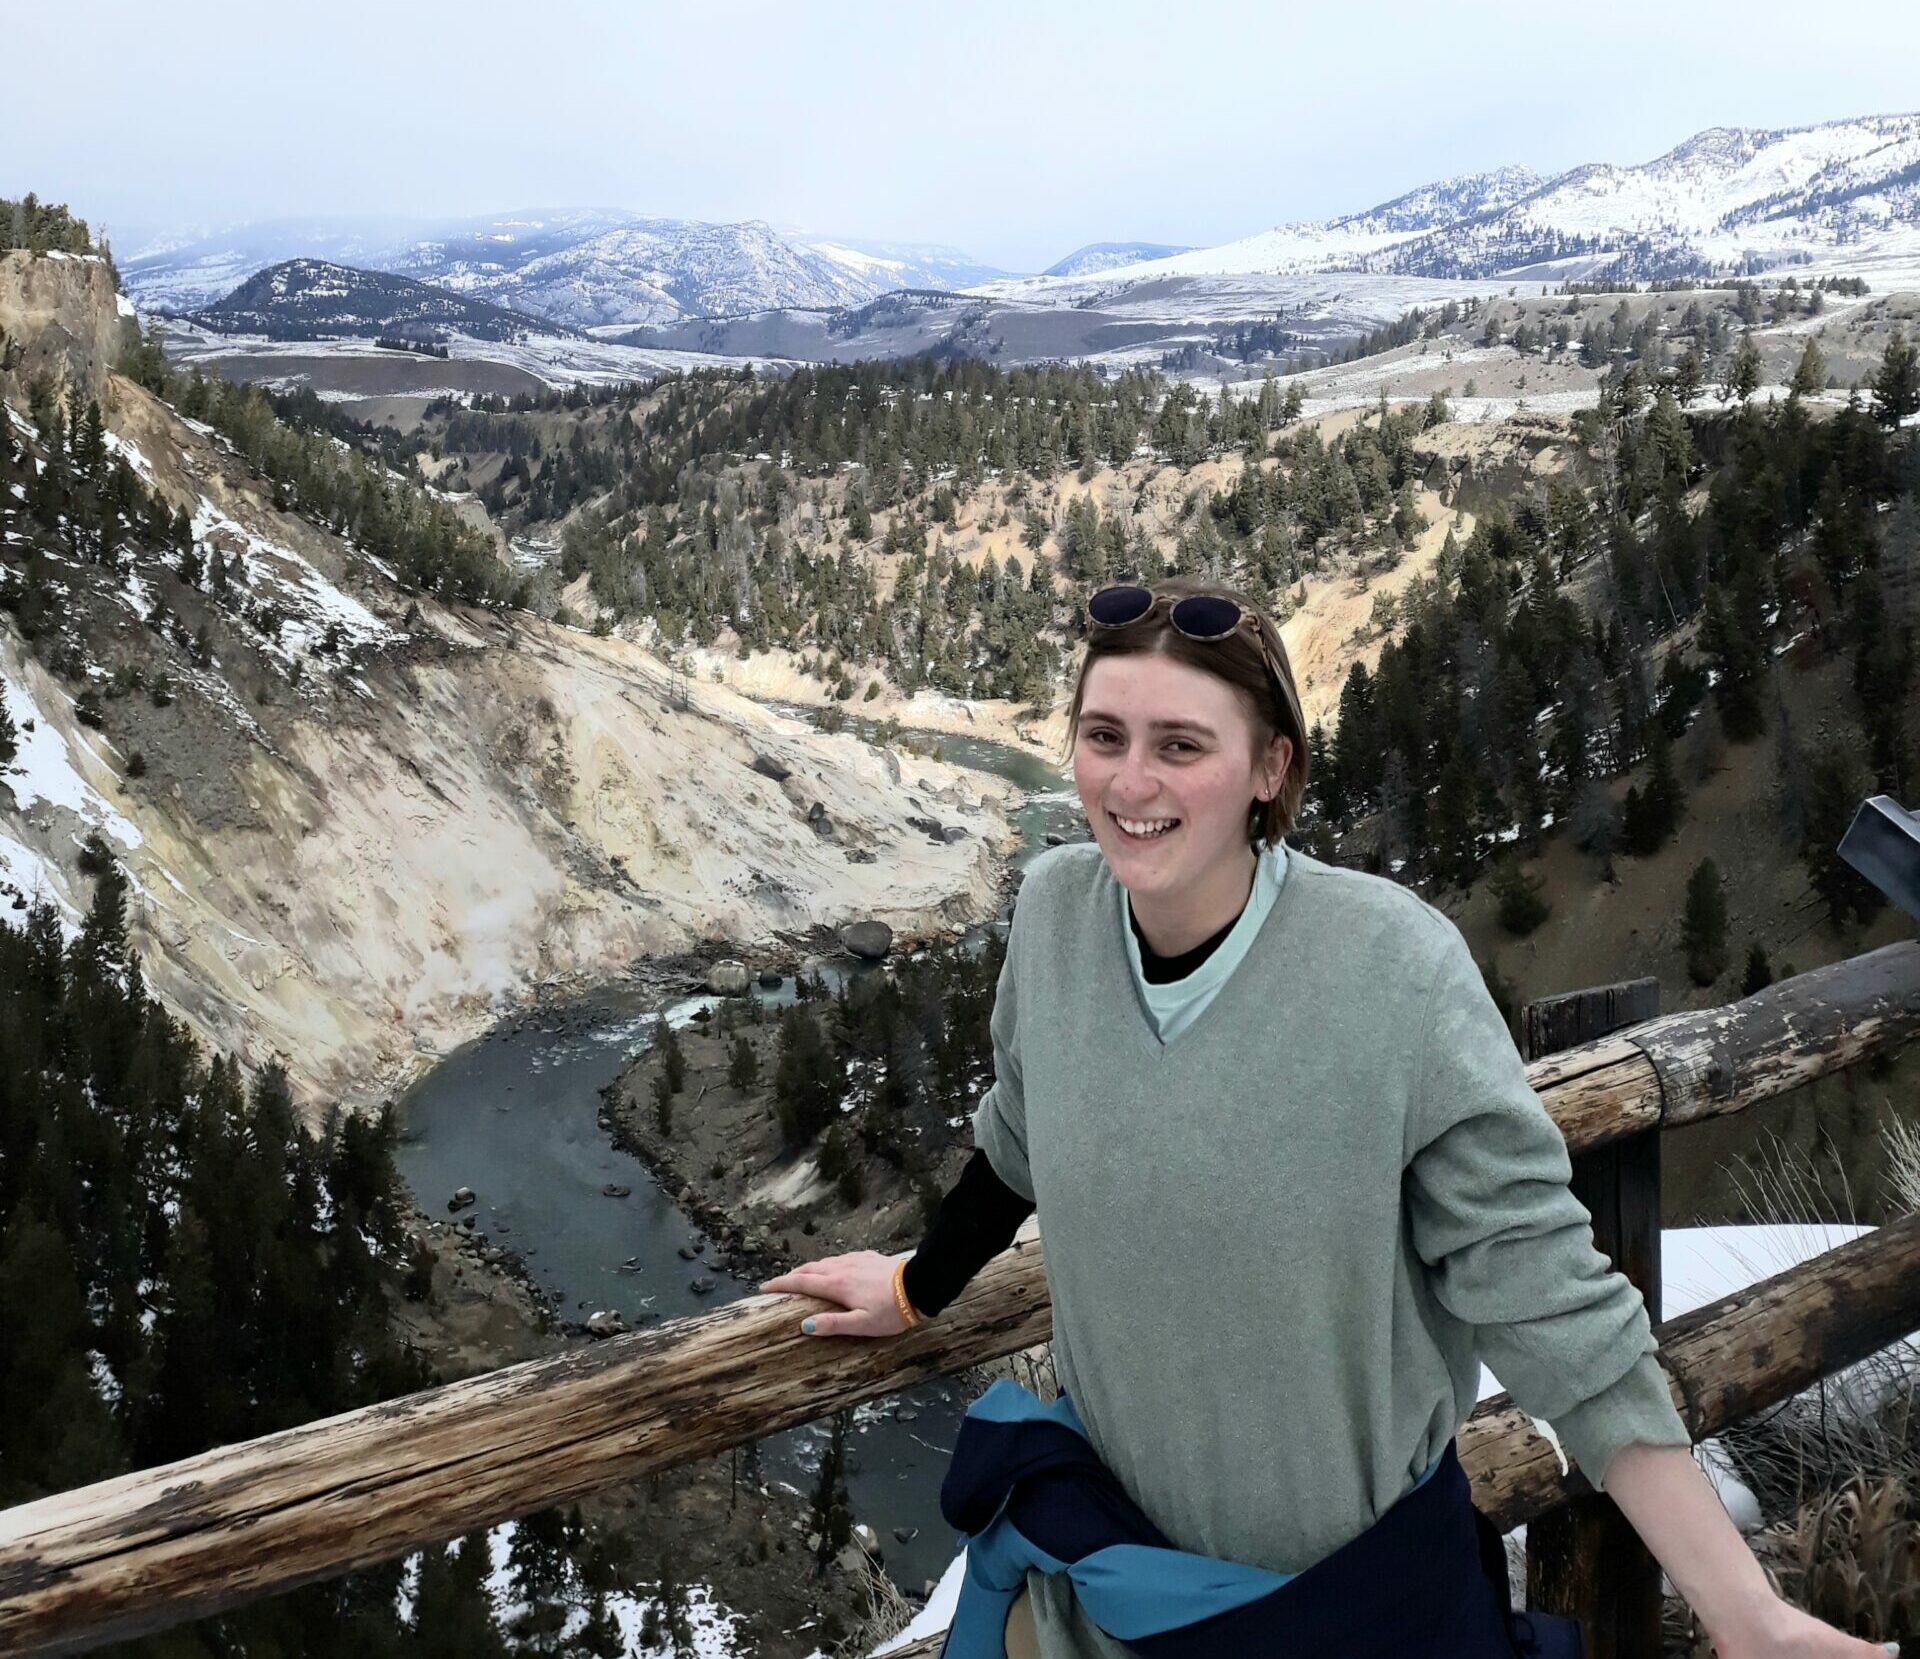 Communications Coordinator Emily stands at a scenic overlook with mountains behind